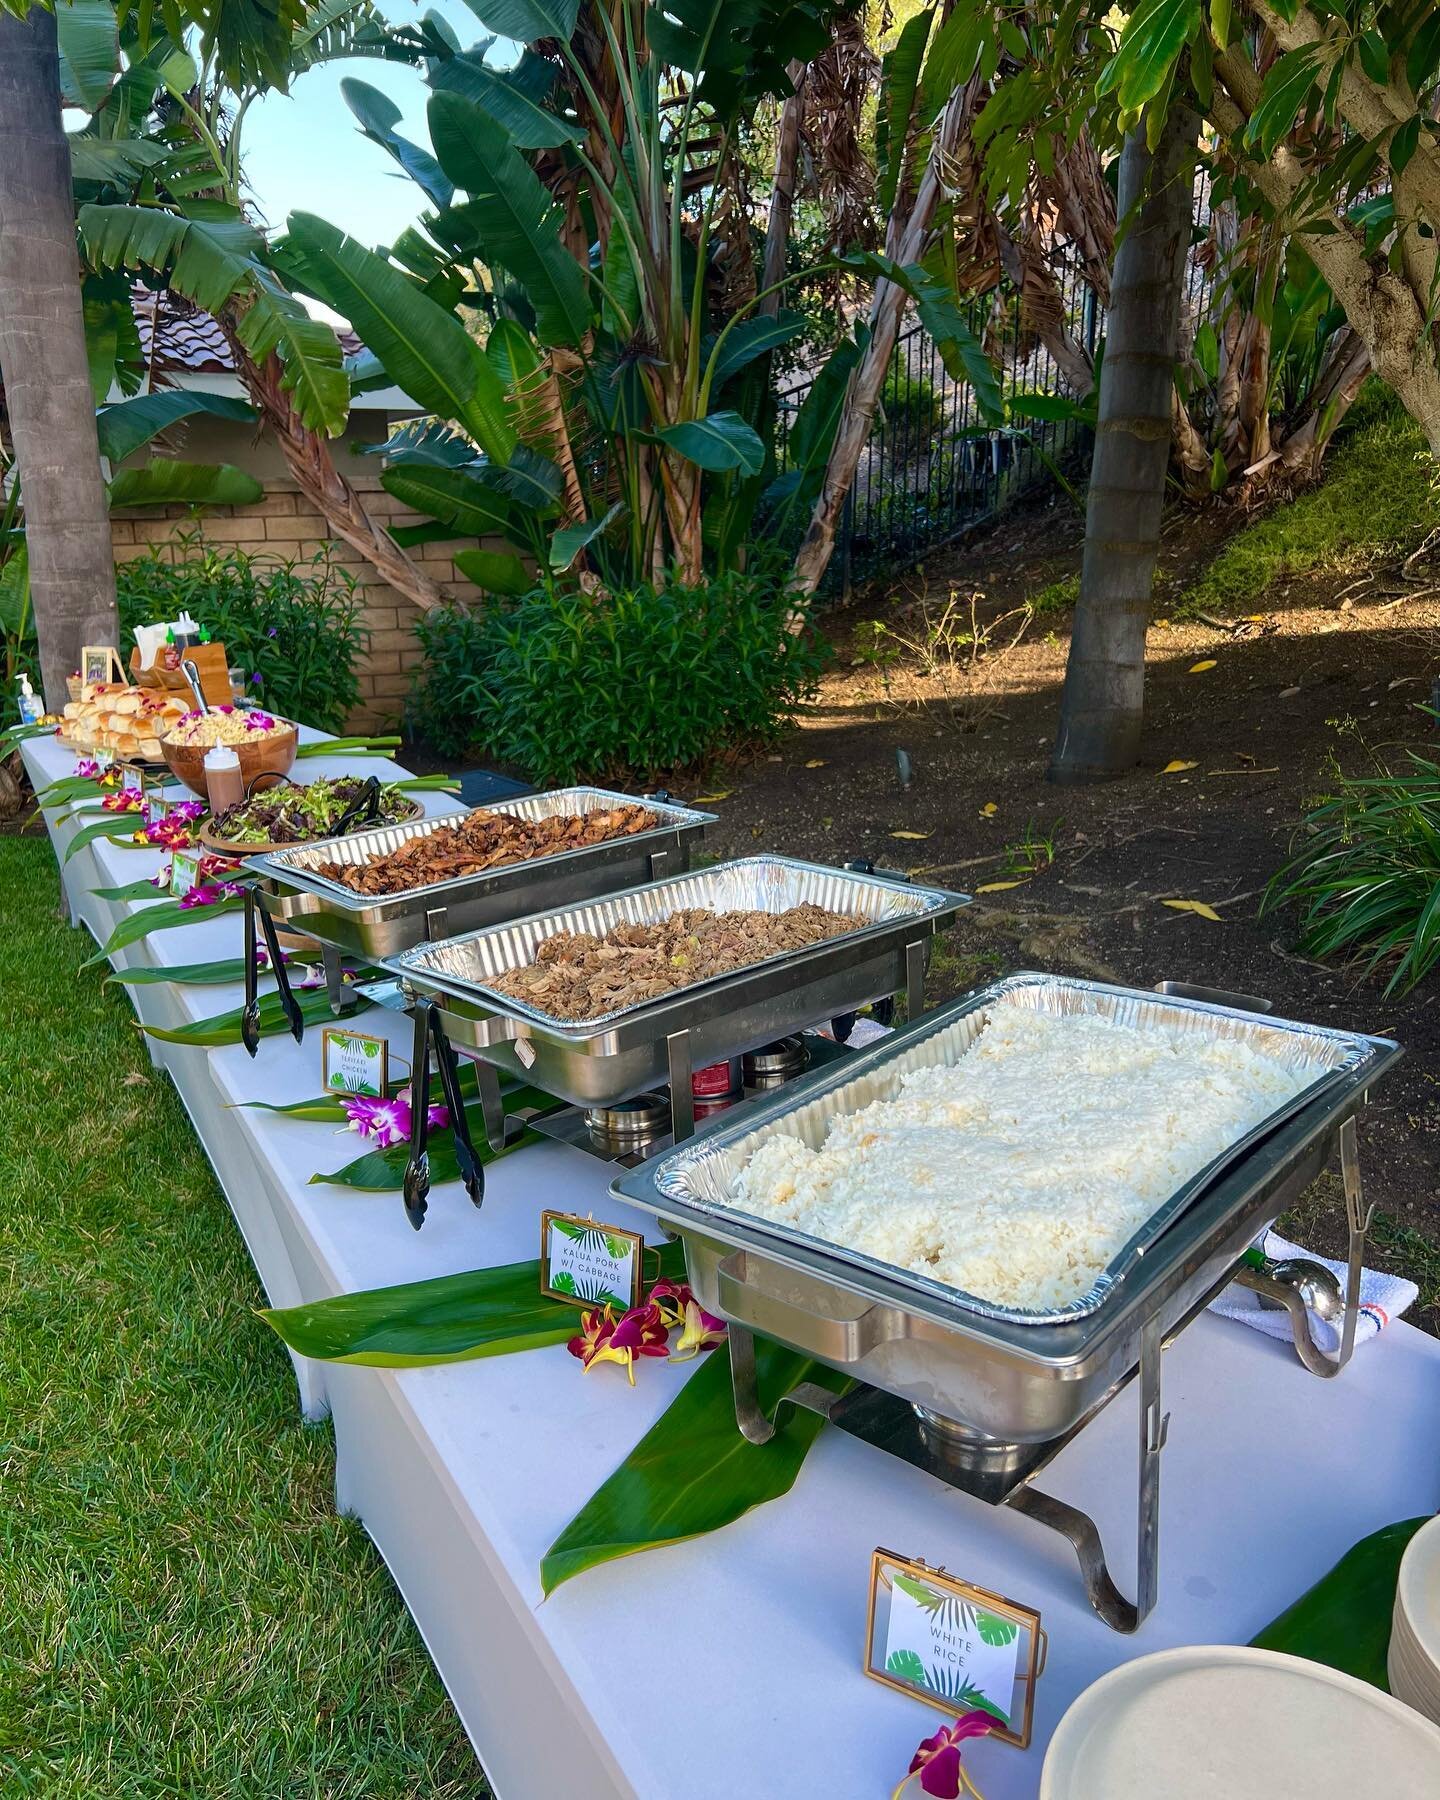 Lu&rsquo;au Catering 
-setup with ti leaves and orchid flowers
-aloha package 1 with hawaiian rolls

Contact Us for your next catering:
(619)538-7036
leilaniscateringpb@gmail.com
𓆉❀☼

 #pacificbeach #leilaniscafe #catering #hawaiiancafe #leilaniscaf